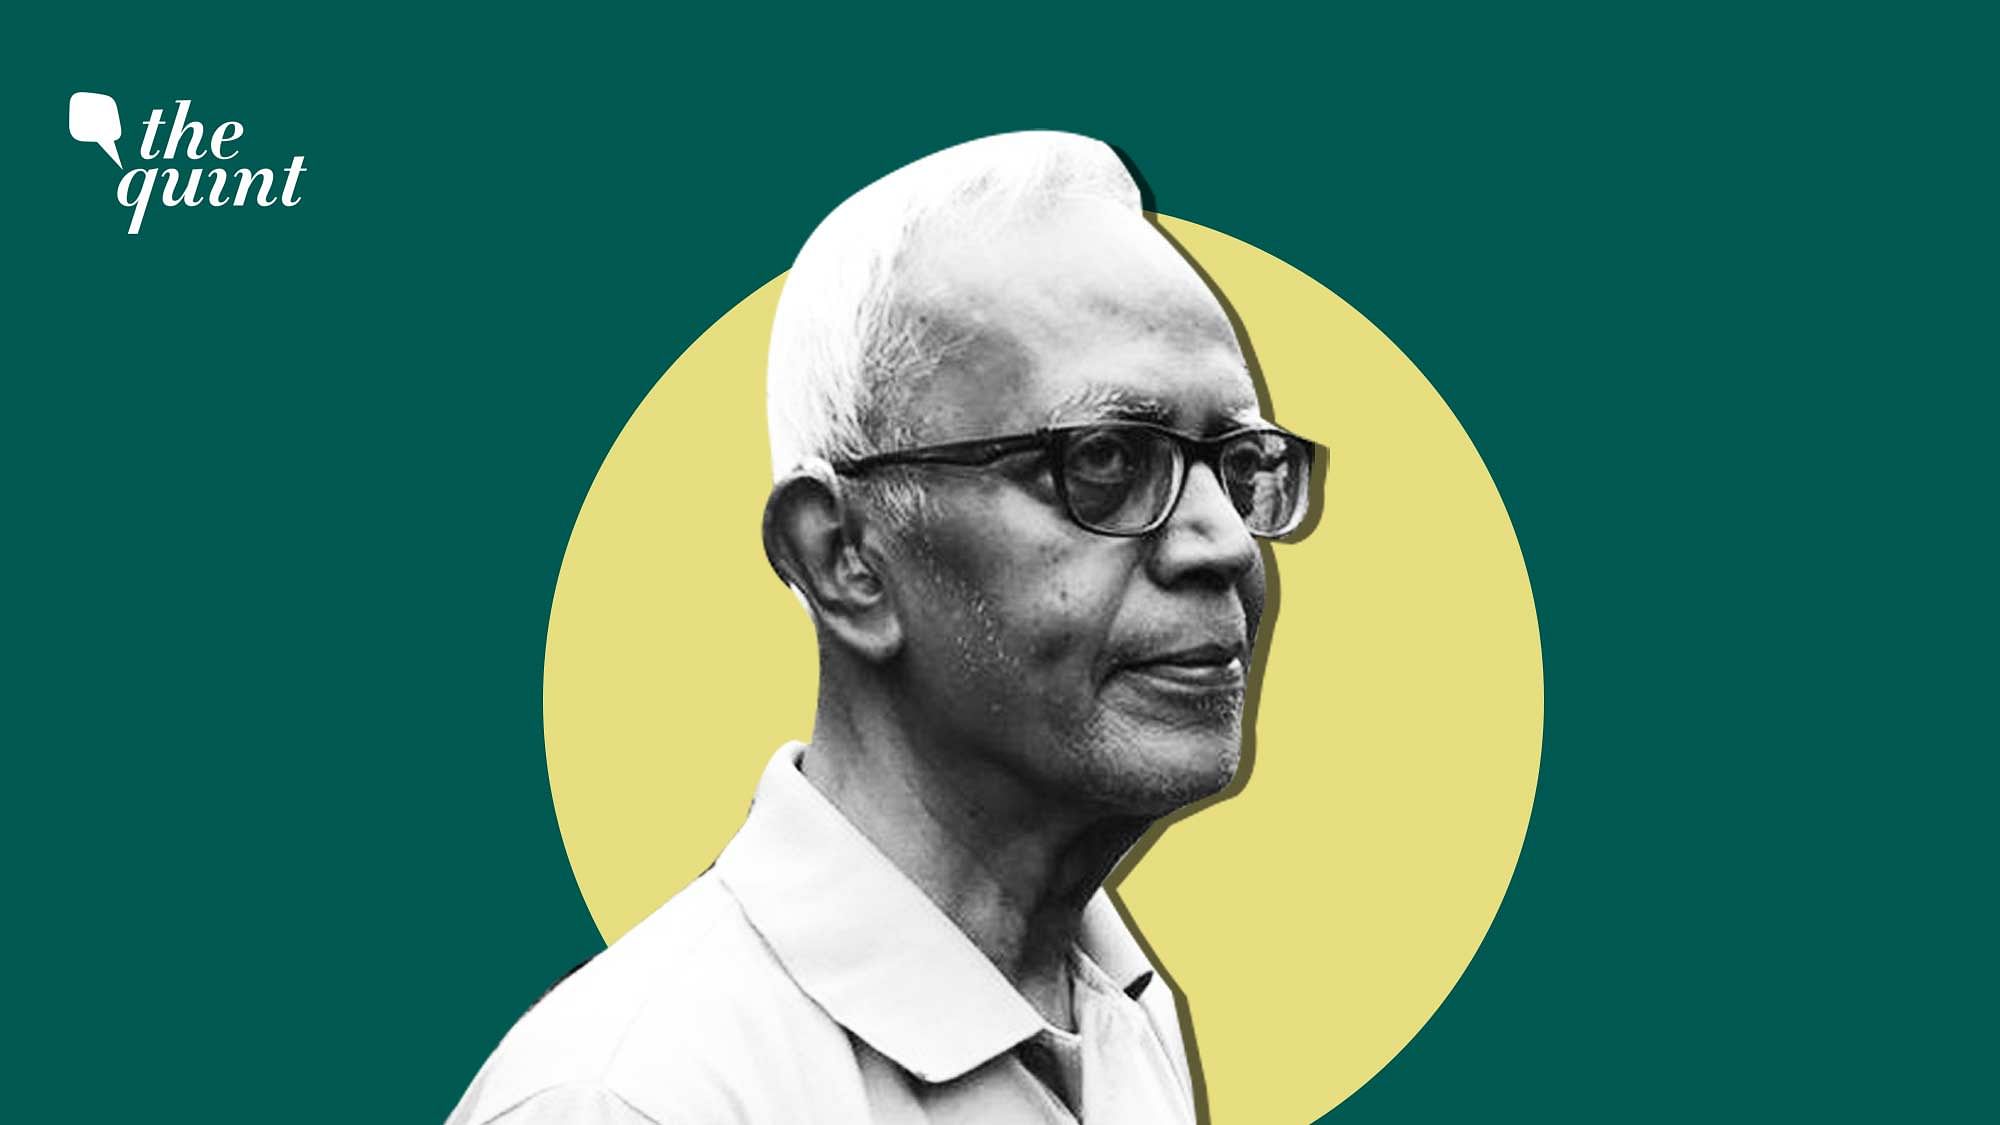 <div class="paragraphs"><p>Human rights activist and Jesuit priest Stan Swamy's counsel and the Jamshedpur Jesuit Province have requested the Bombay High Court to clear Swamy's name and reputation in the Bhima Koregaon case. Image used for representation.&nbsp;</p></div>